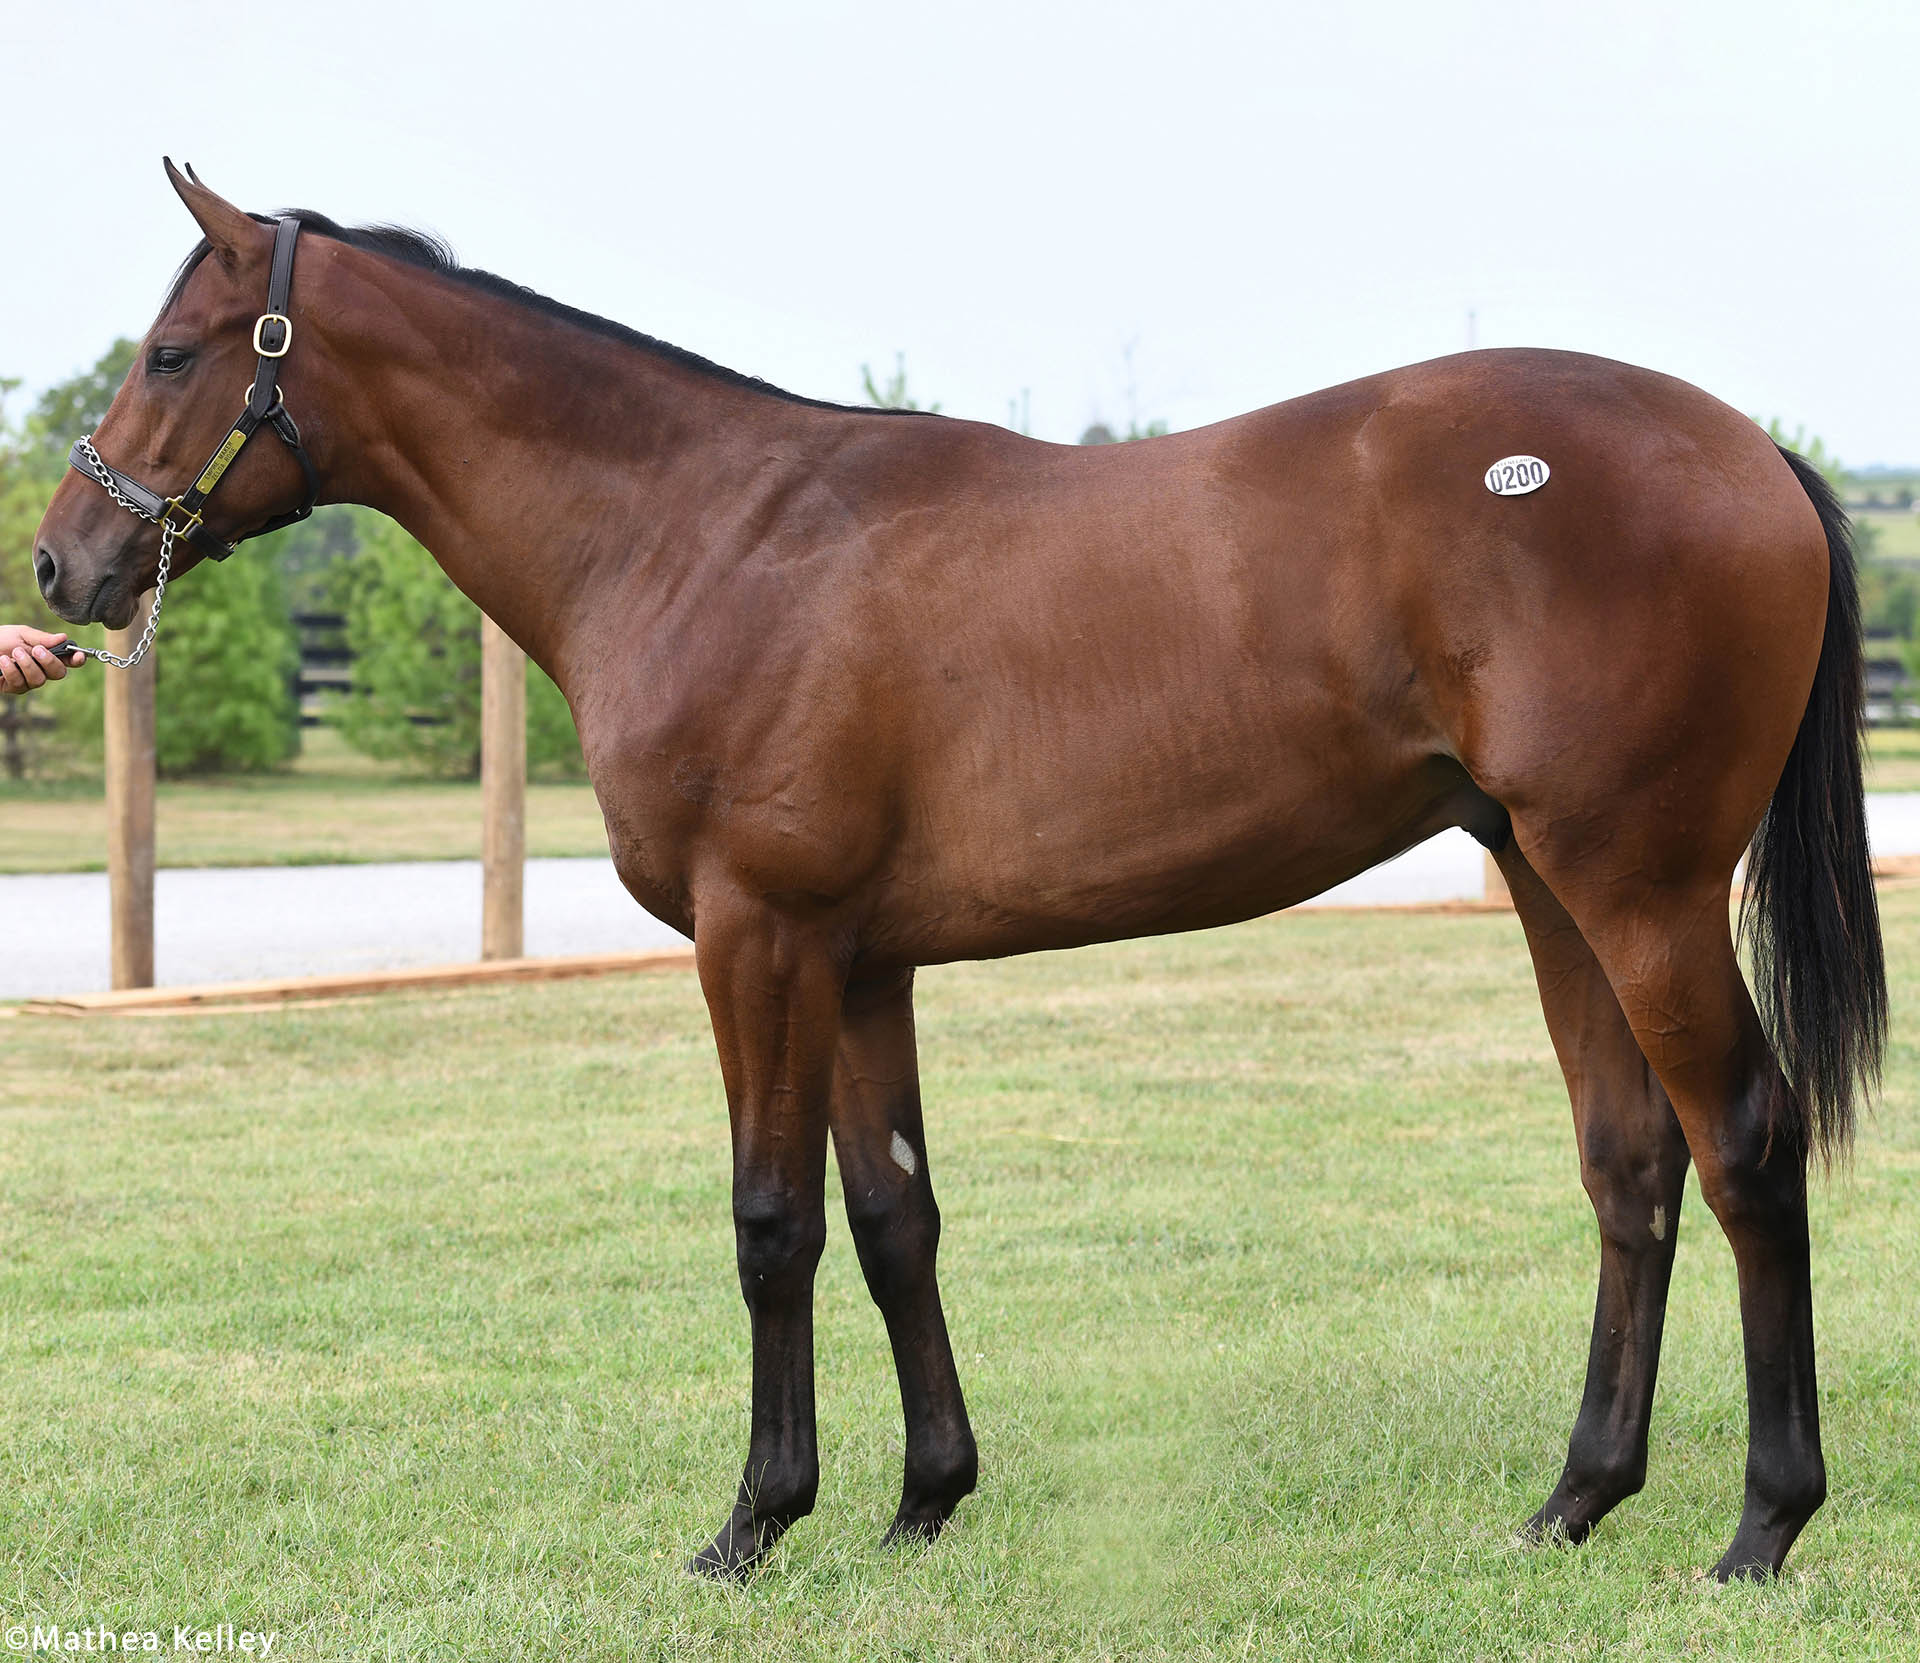 Empire Maker colt out of the Niagara Causeway mare Zelda Rose, purchased at Keeneland September and available for a thoroughbred racing partnership.